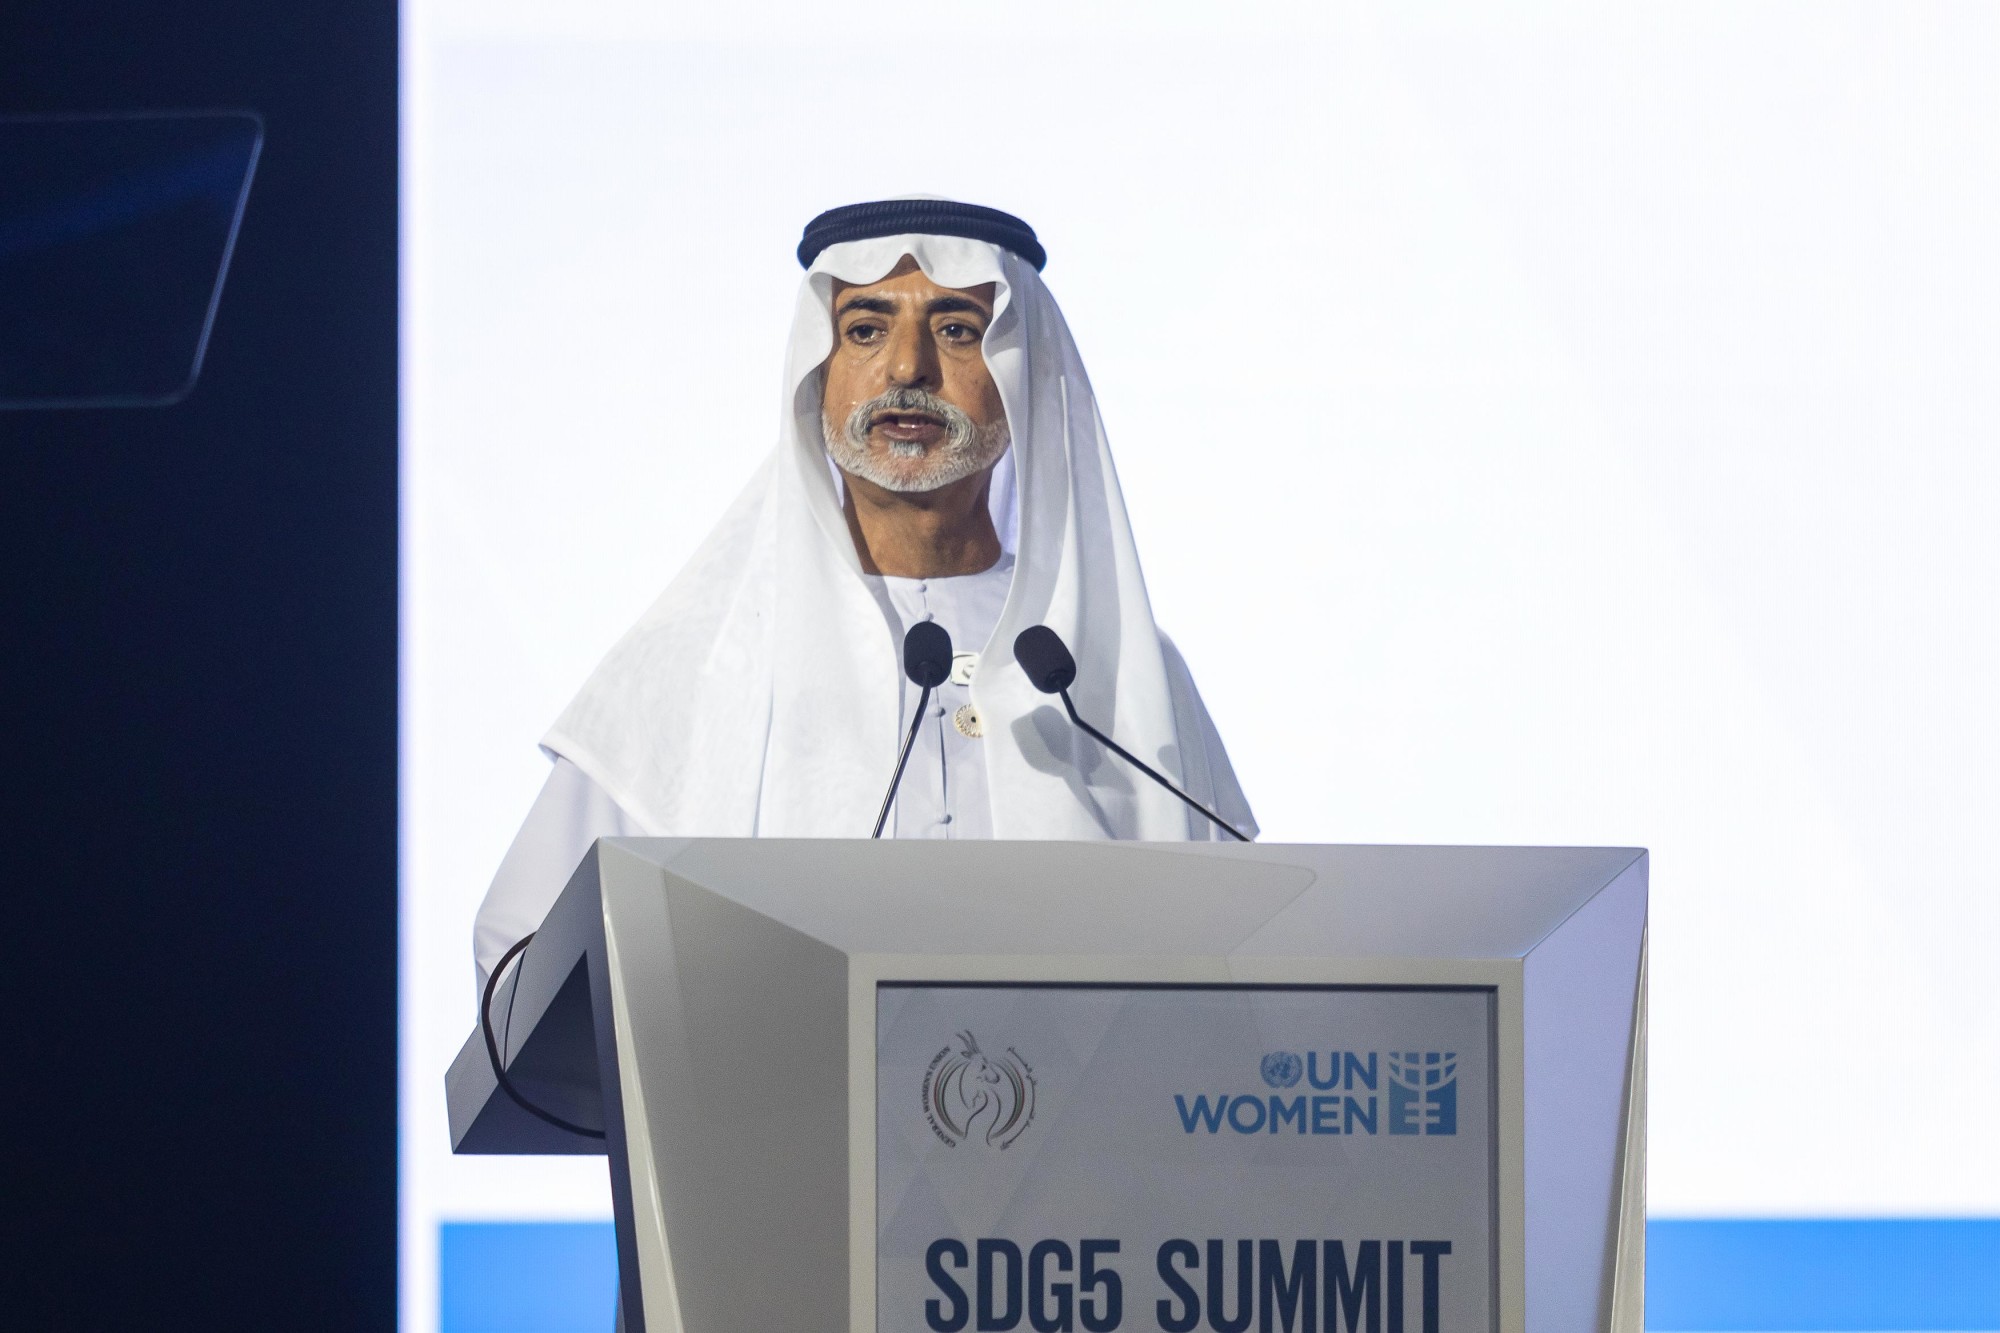 His Excellency Sheikh Nahayan Mabarak Al Nahayan, UAE Minister of Tolerance and Coexistence Commissioner General of Expo 2020 Dubai speaks during the UN Women SDG 5 Summit at Dubai Exhibition Centre m60764